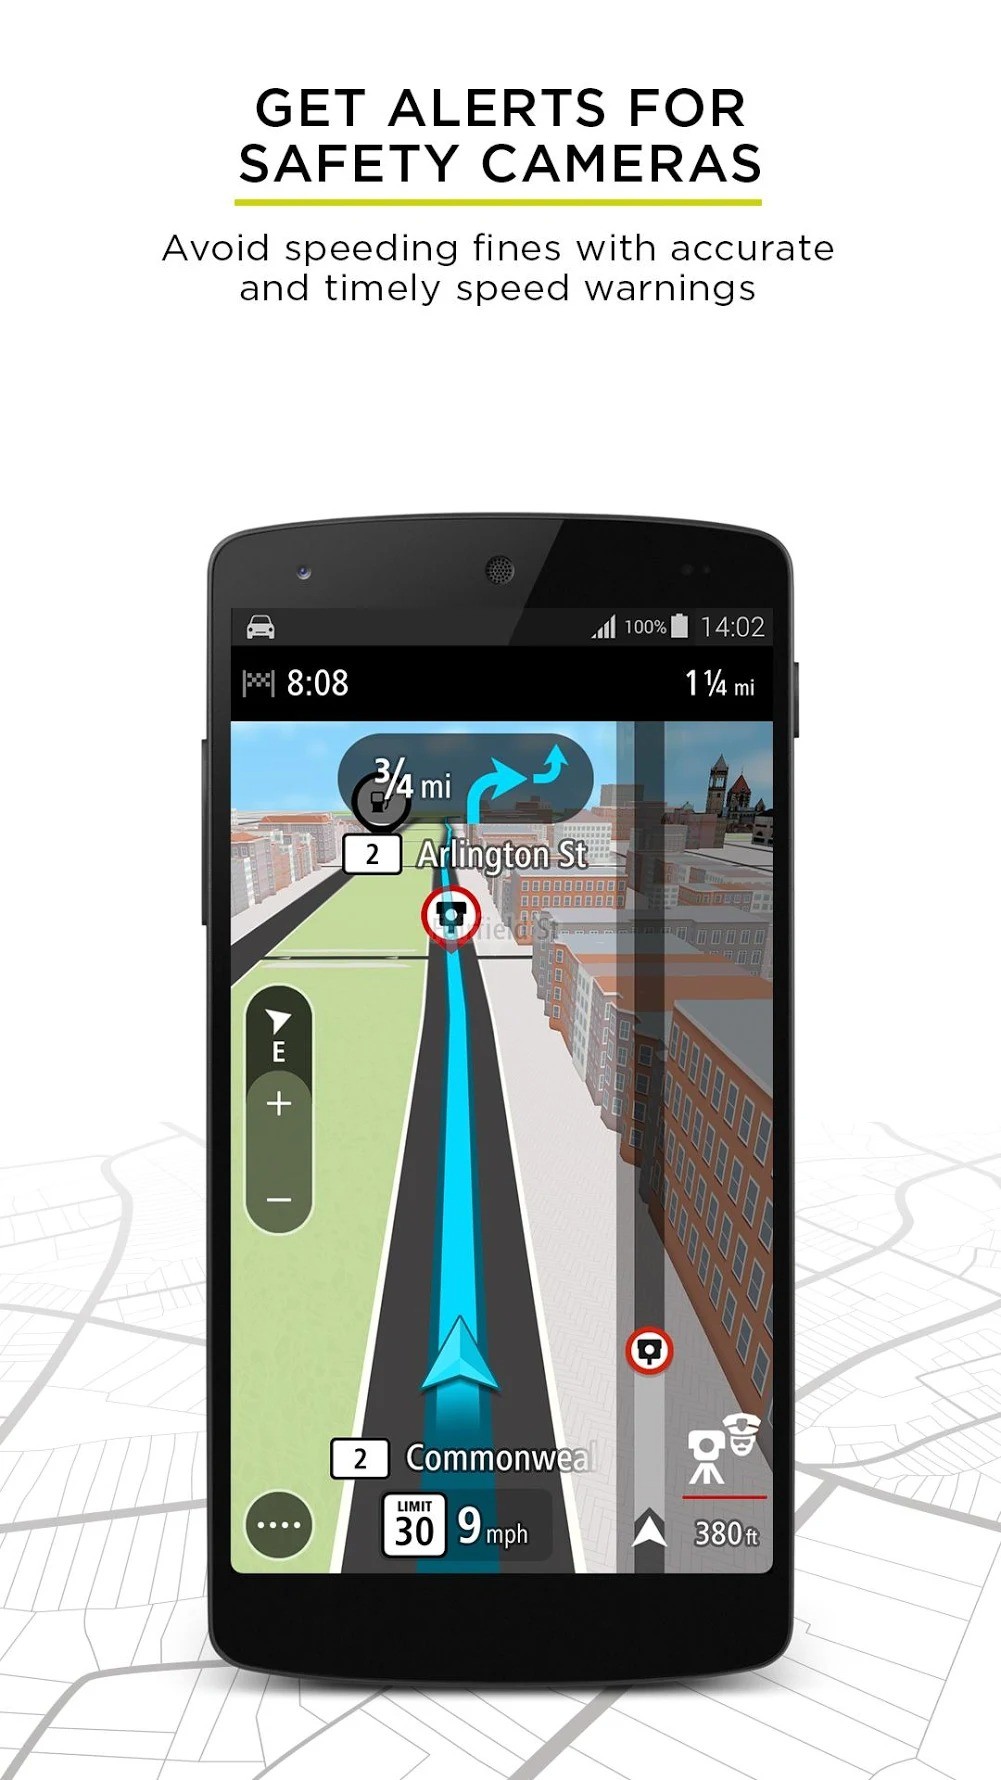 tomtom home 2.5 download